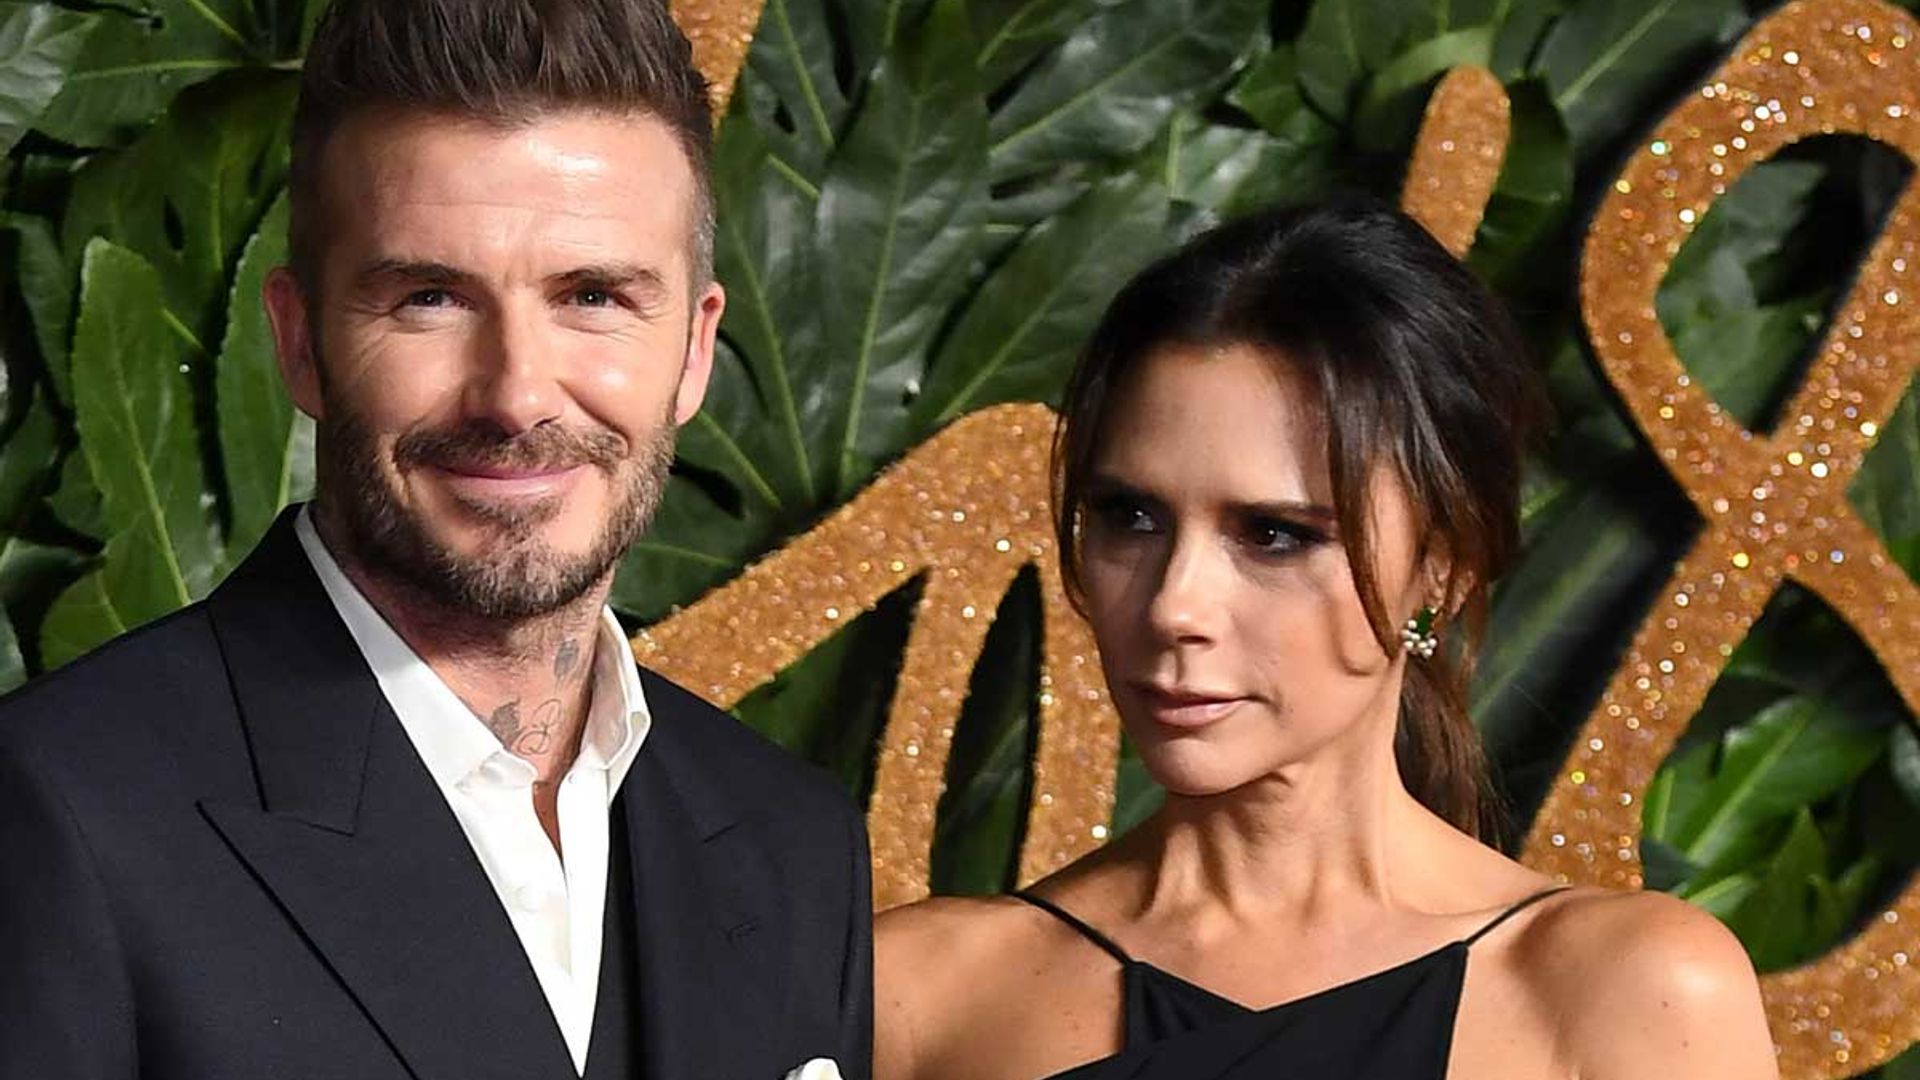 David Beckham pokes fun at wife Victoria during Aspen hike in extremely  tight bodysuit | HELLO!